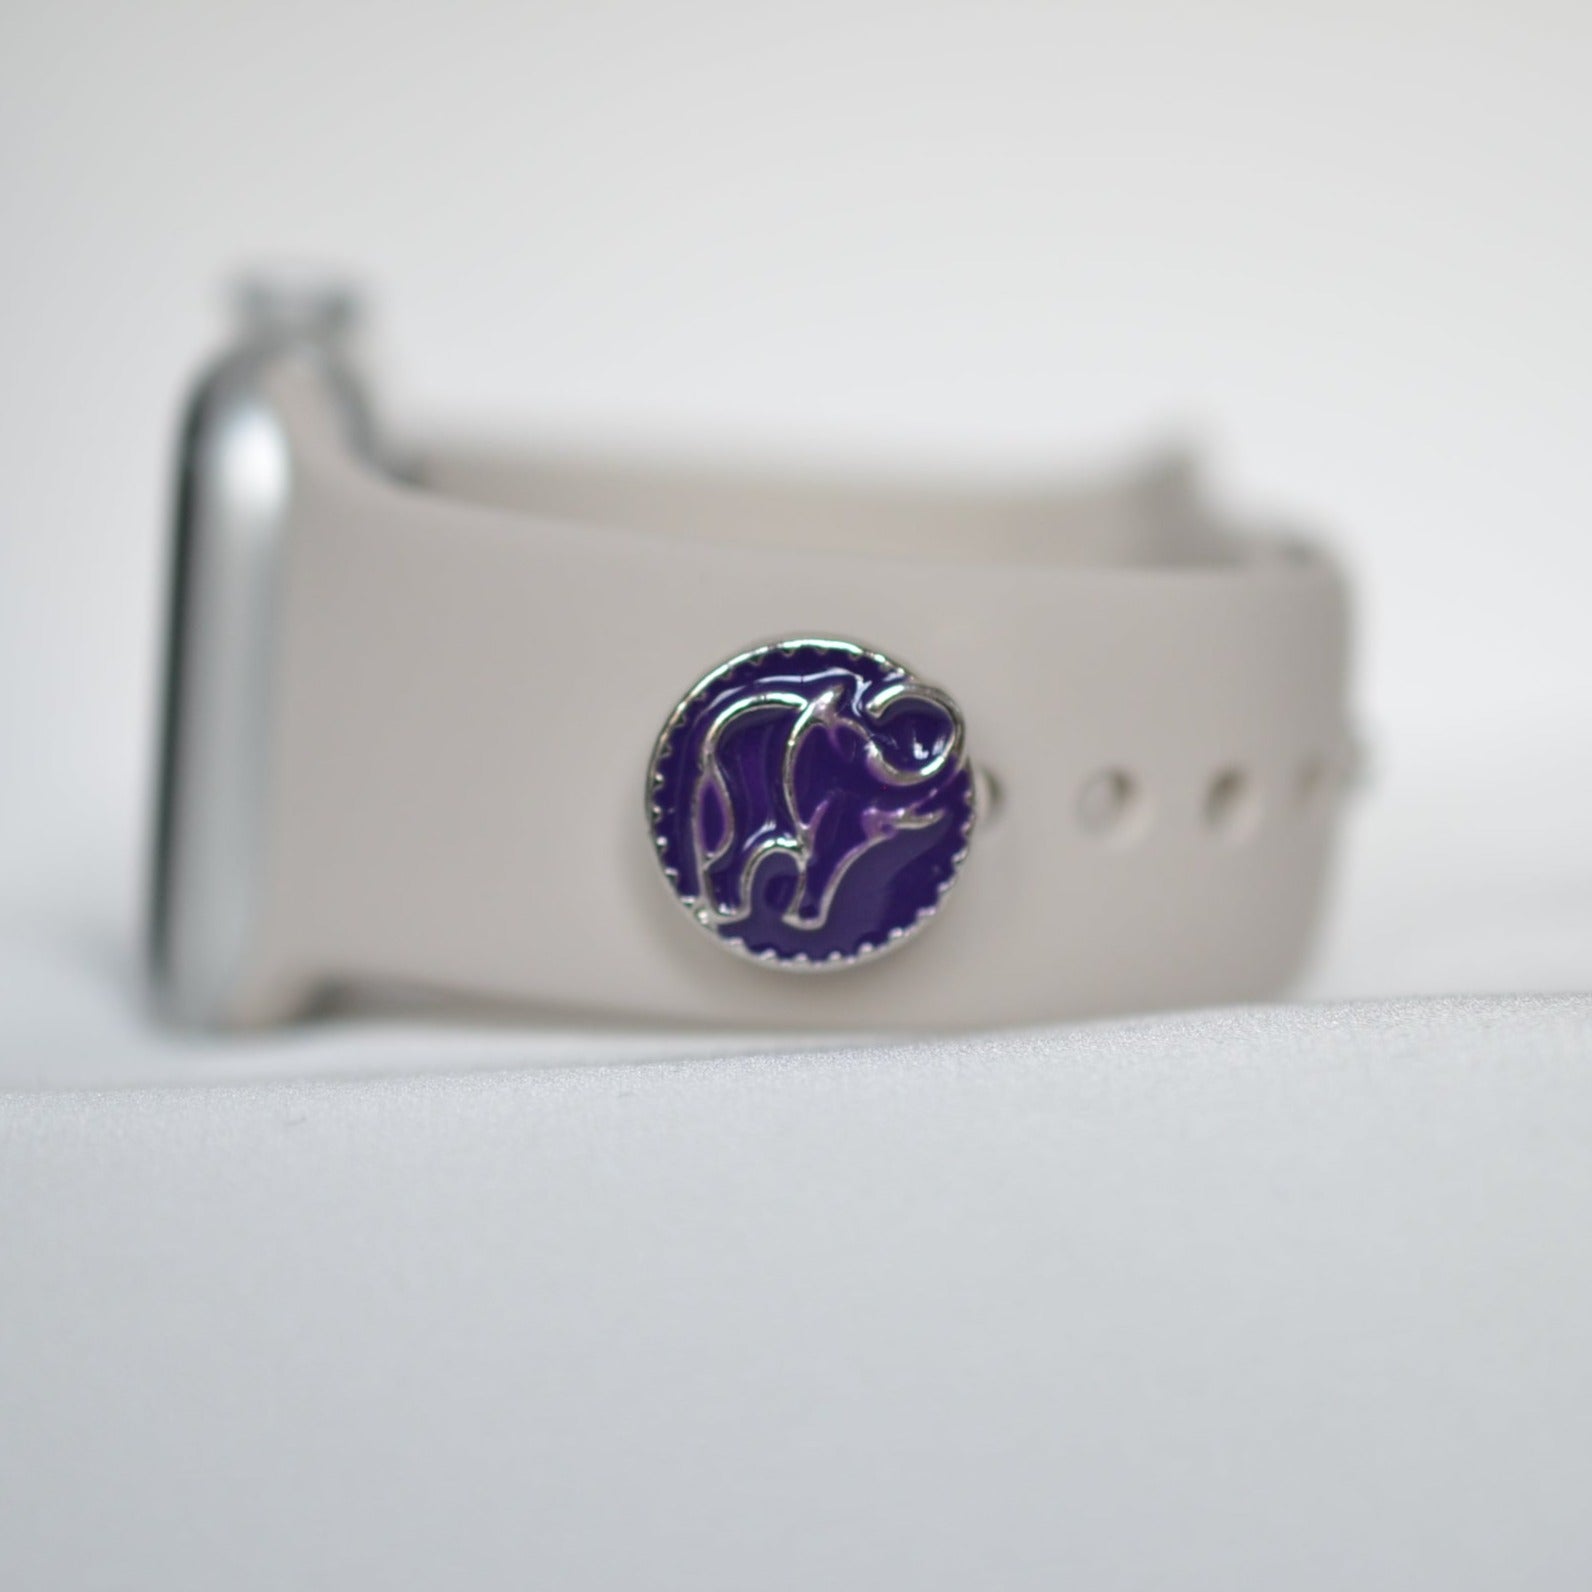 Purple Elephant Charm for Bags, Belts and Watch Bands